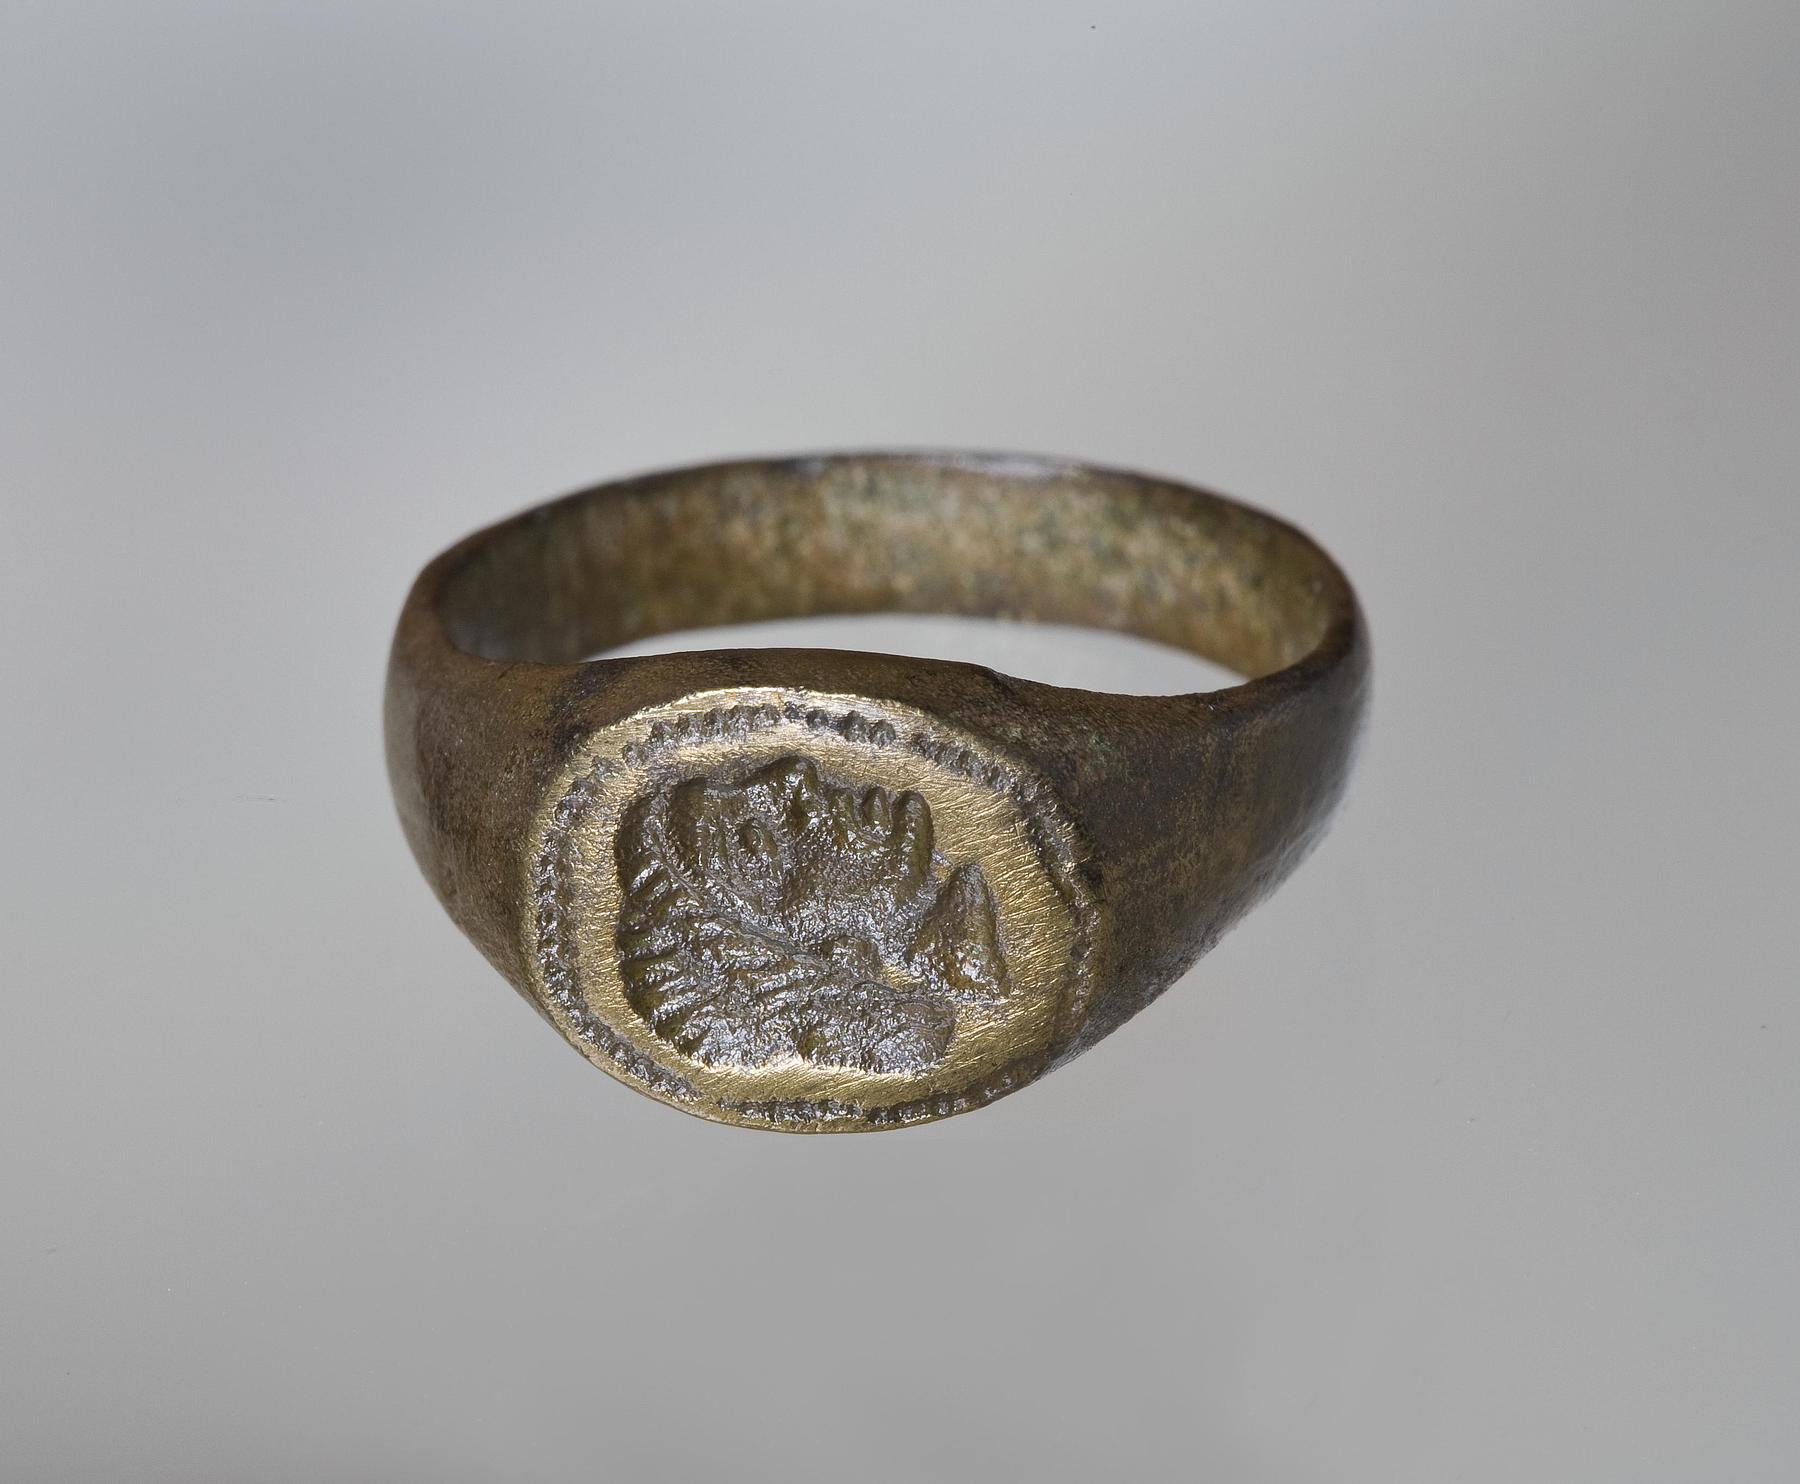 Finger ring with the head of a youth, H2206